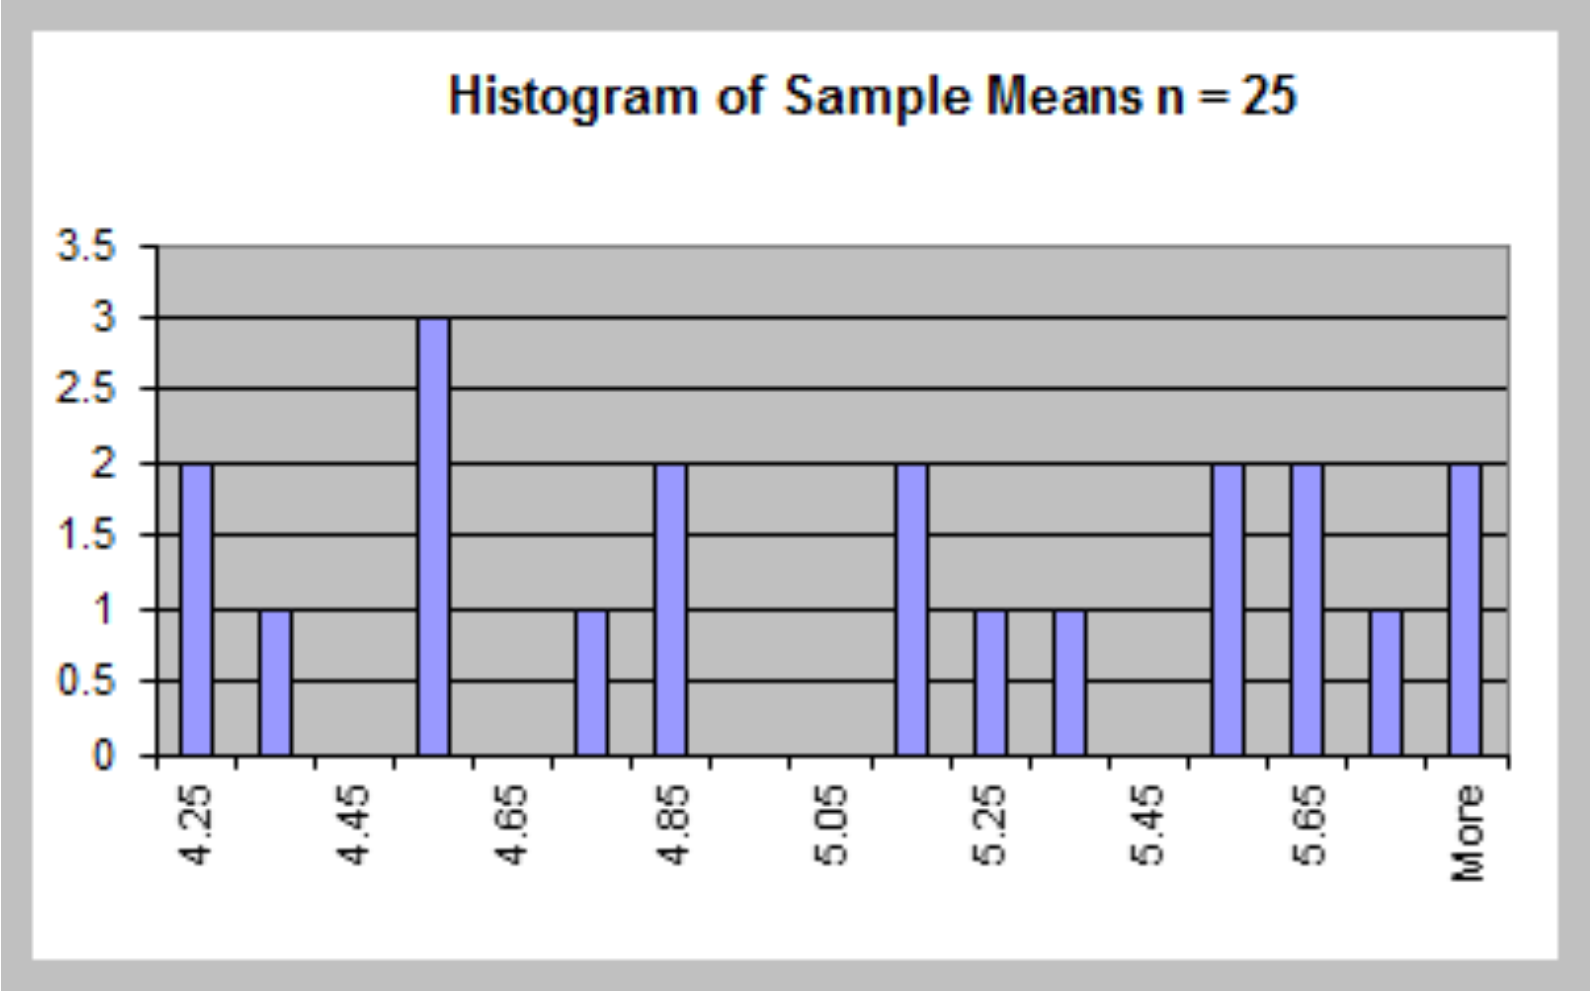 Histogram of 20 Sample Means